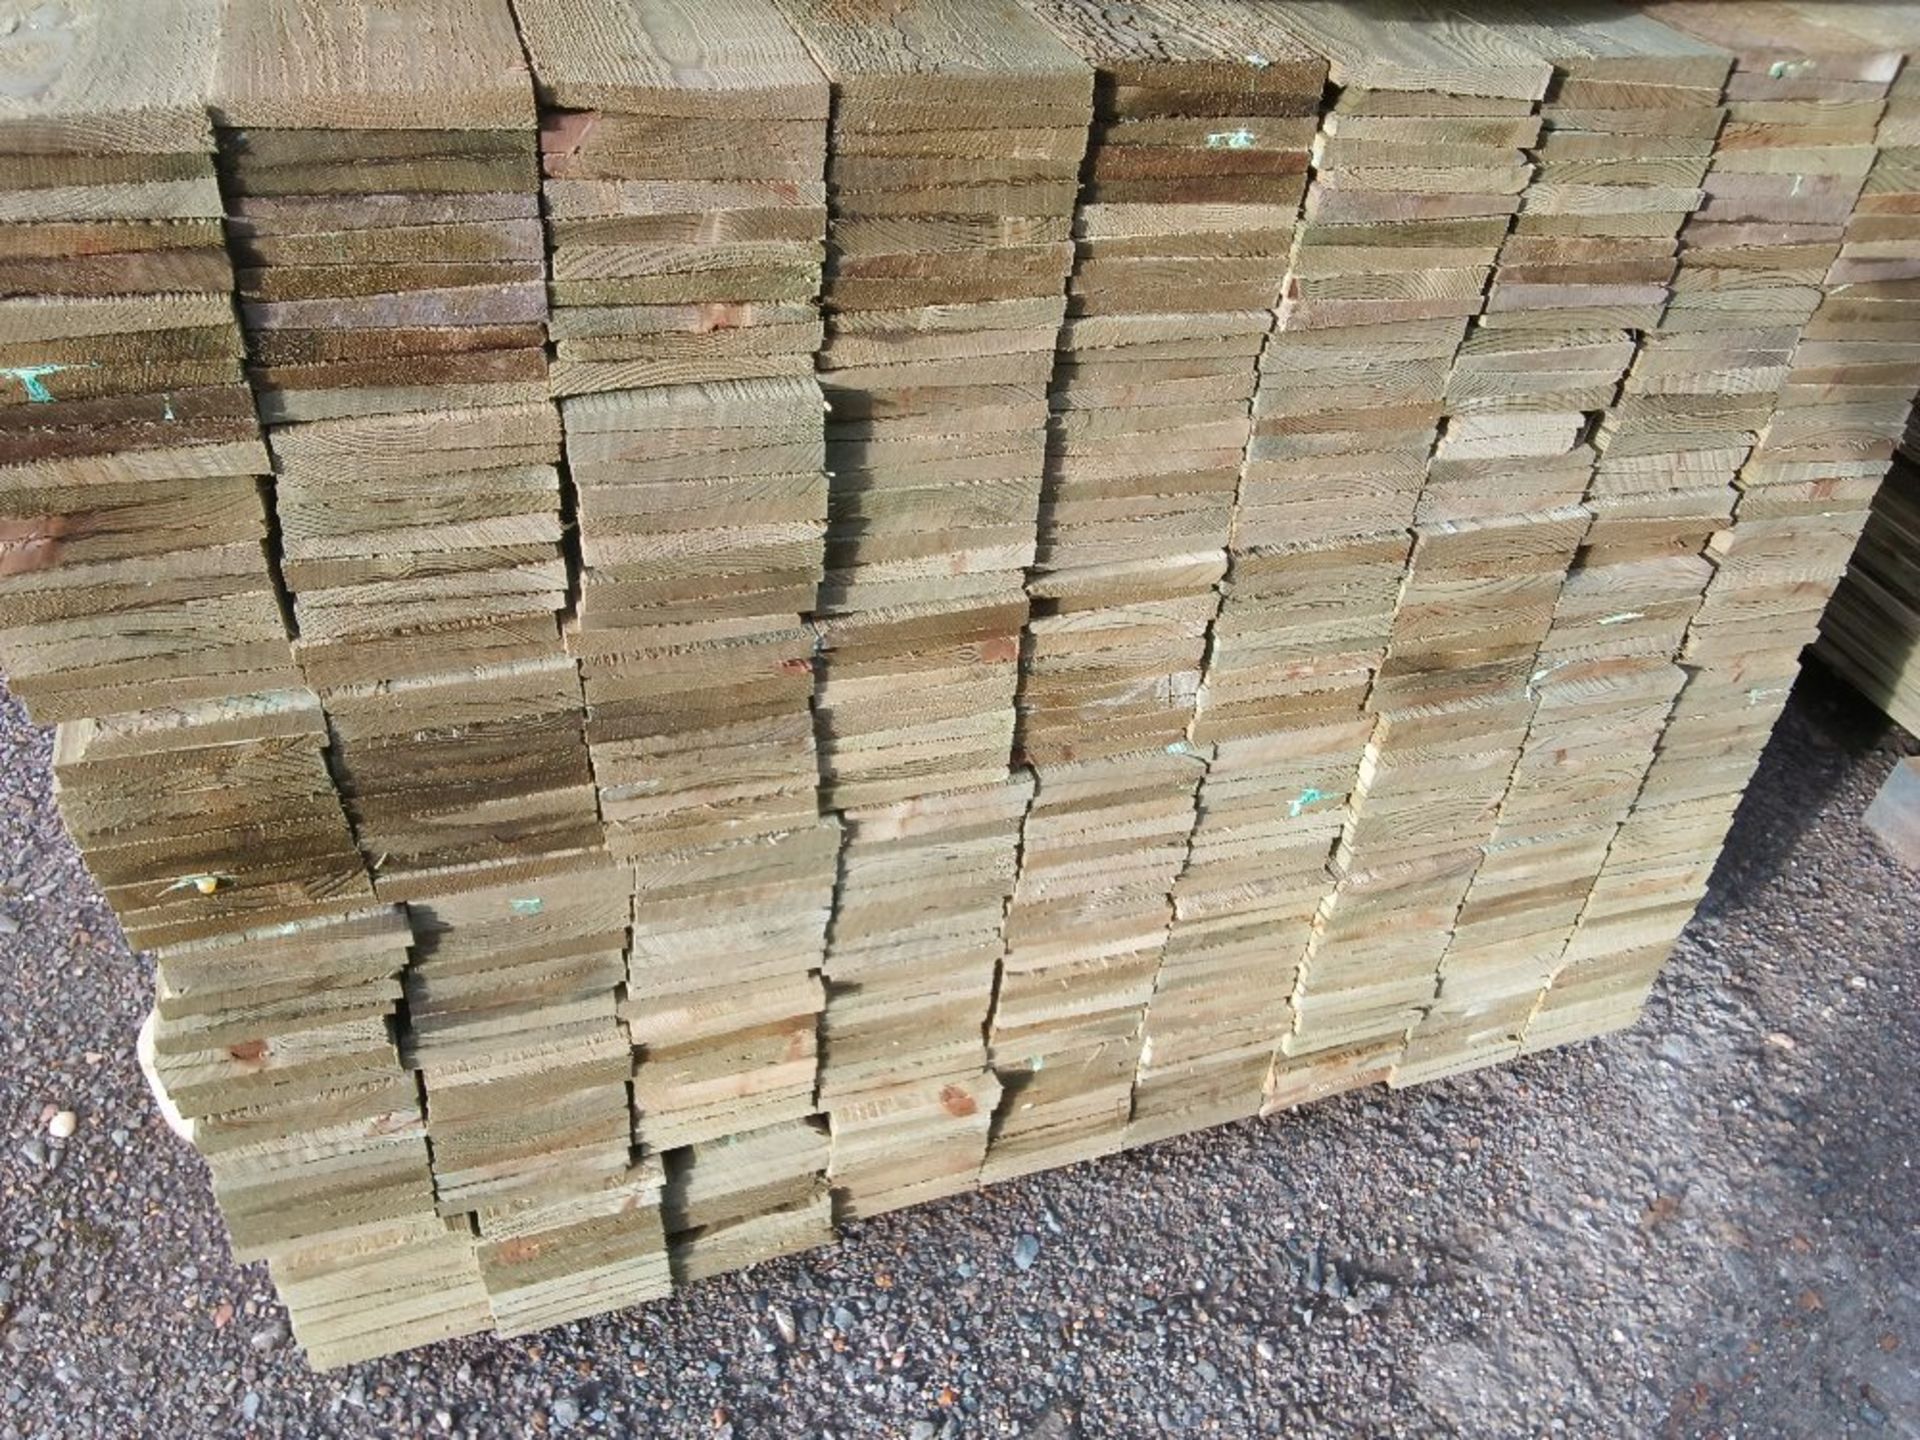 LARGE PACK OF TREATED FEATHER EDGE CLADDING TIMBER BOARDS: 1.65M LENGTH X 100MM WIDTH APPROX. - Image 2 of 3